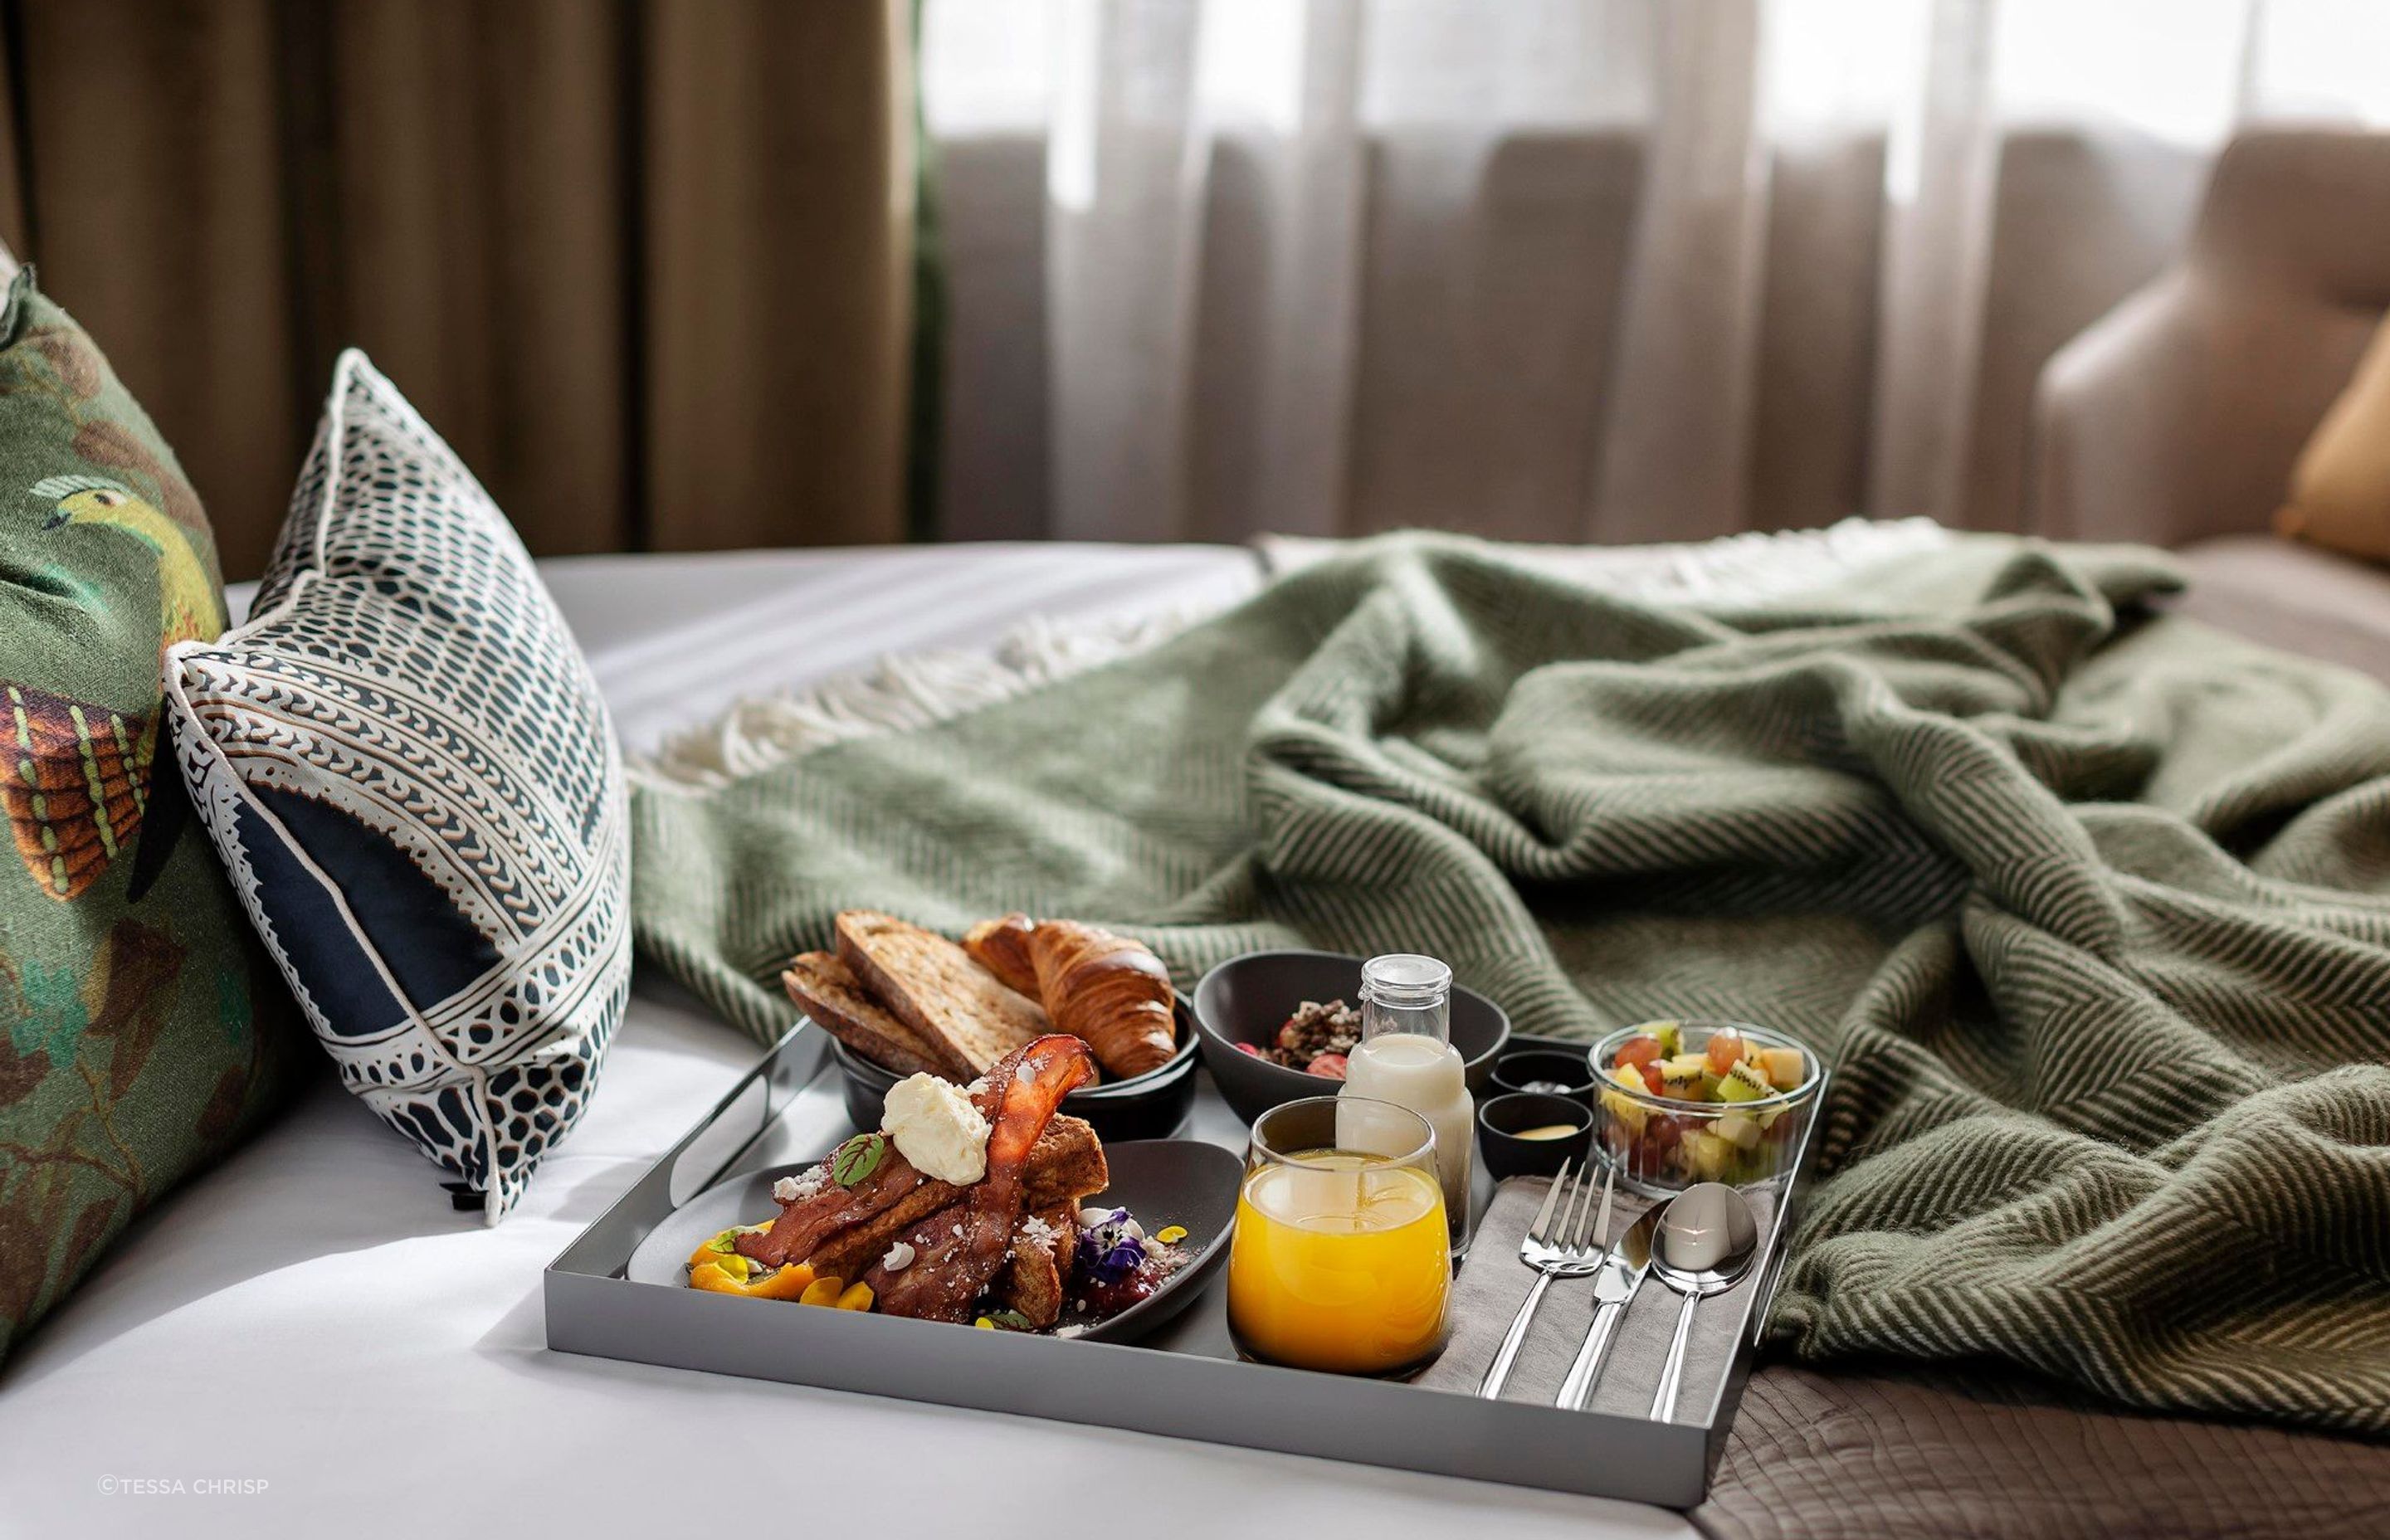 The breakfast tray was designed in collaboration with the onsite chef to perfectly cater for the hotel's breakfast offering.